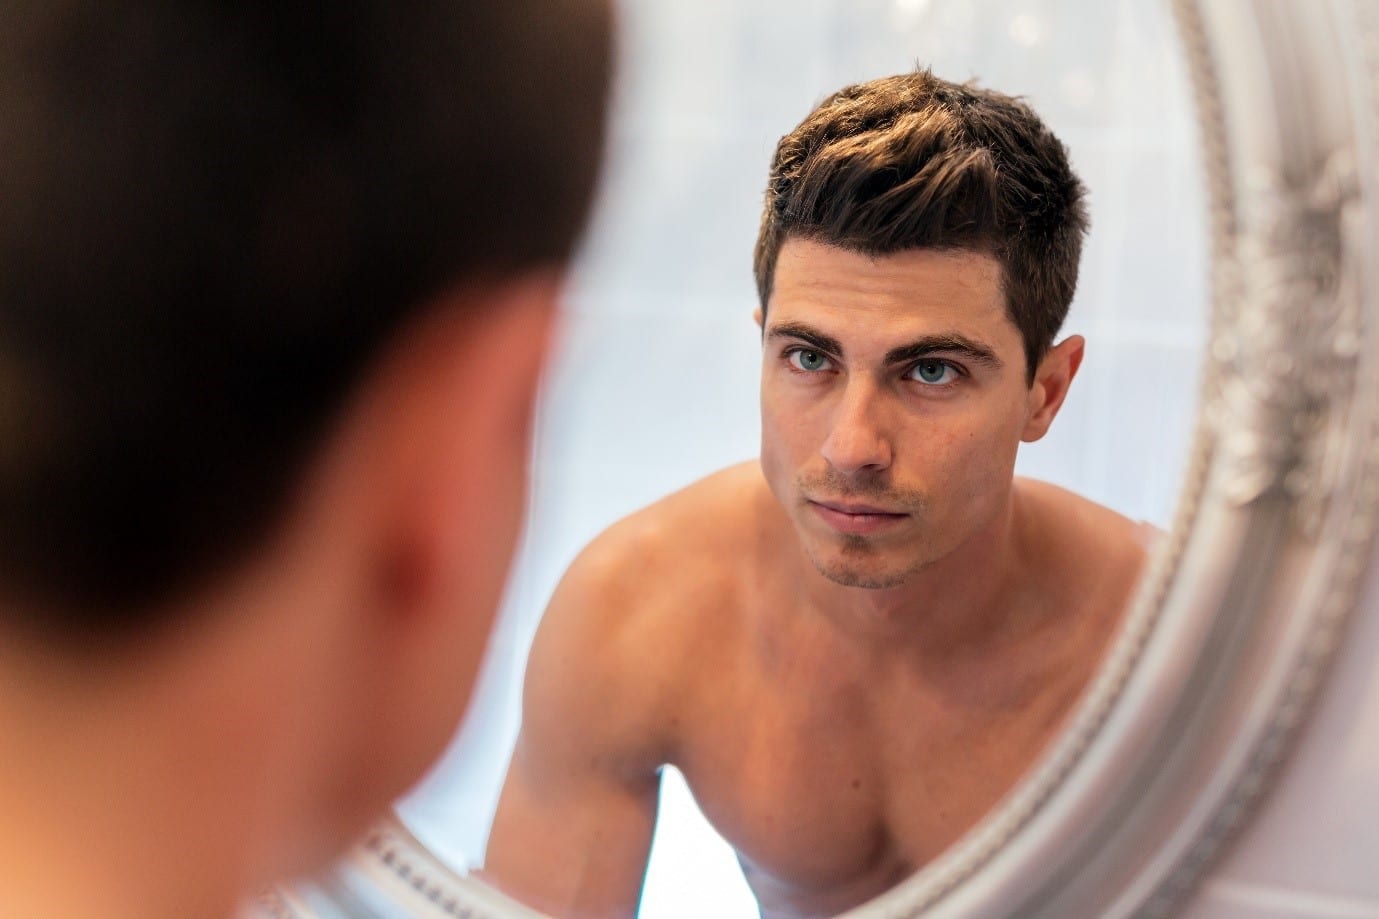 aesthetic treatments for men - man looking in the mirror